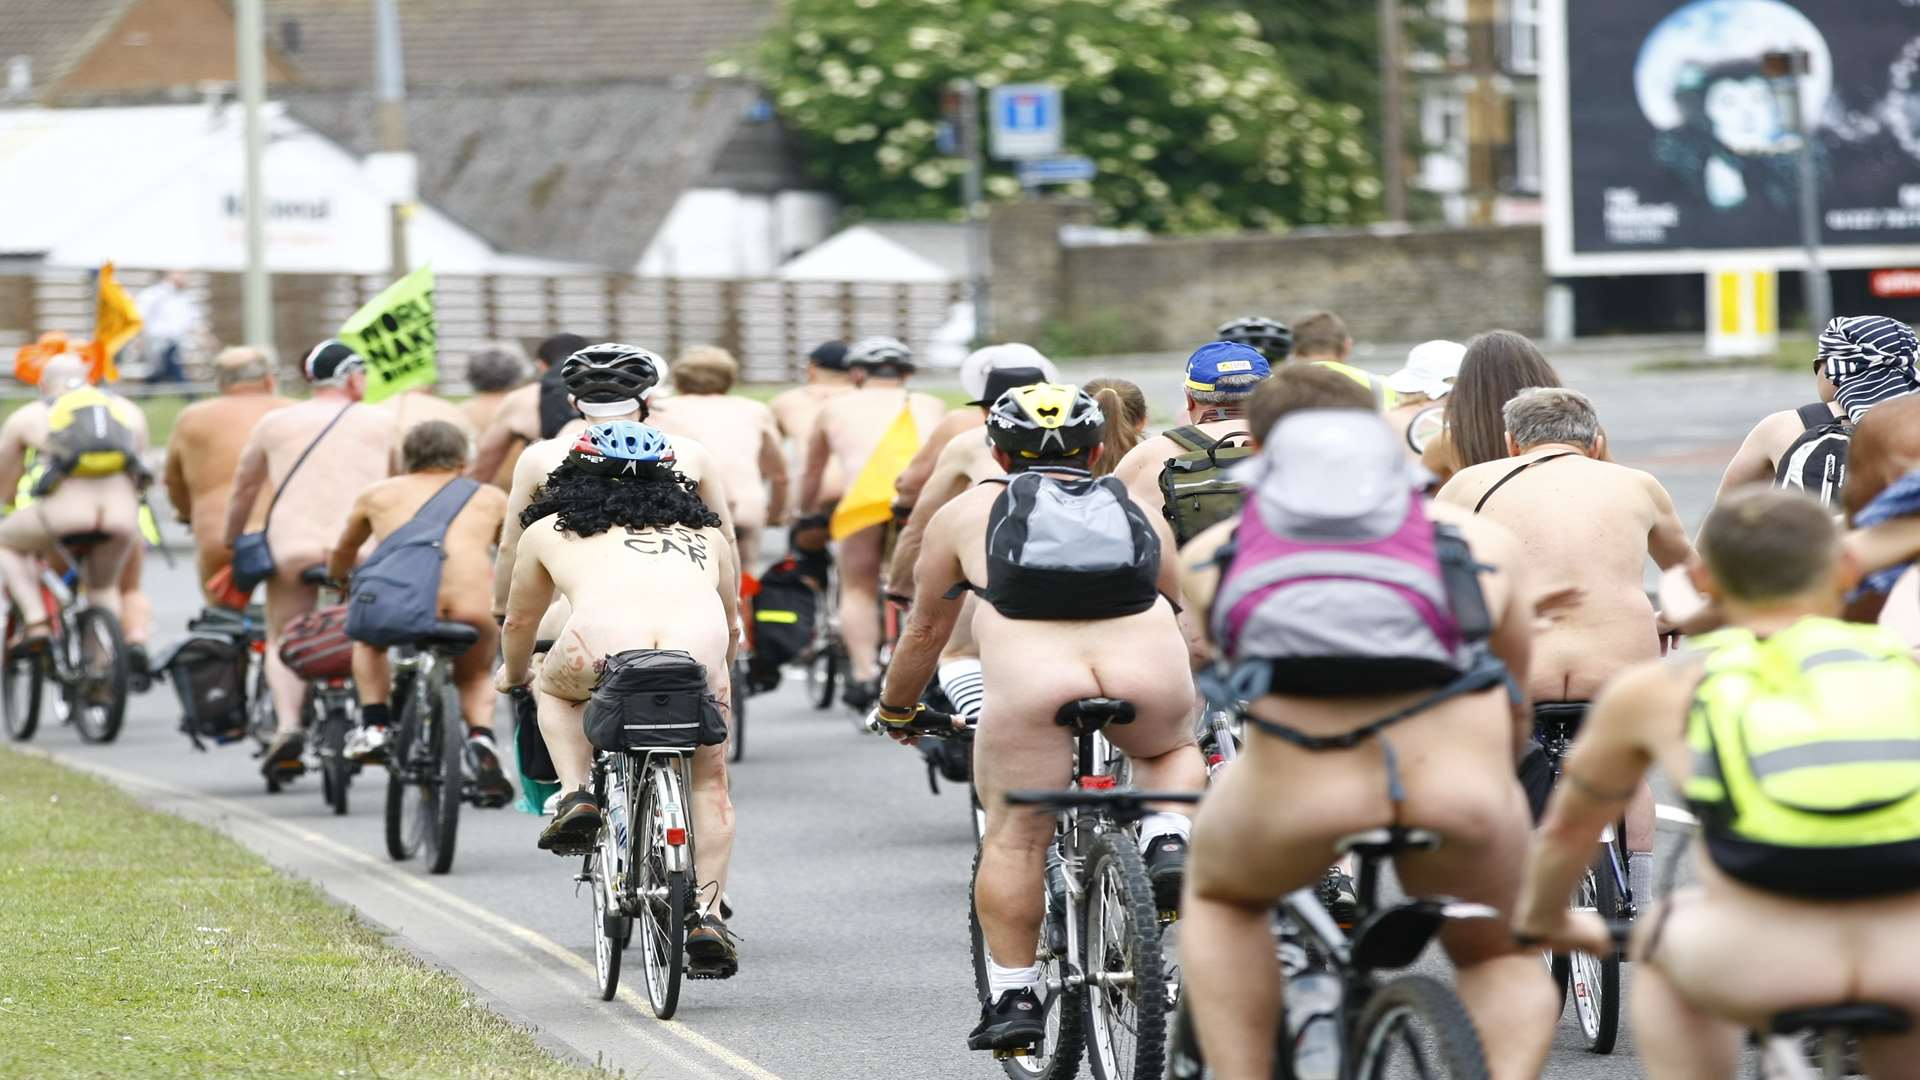 The World Naked Bike Ride is coming back to Canterbury